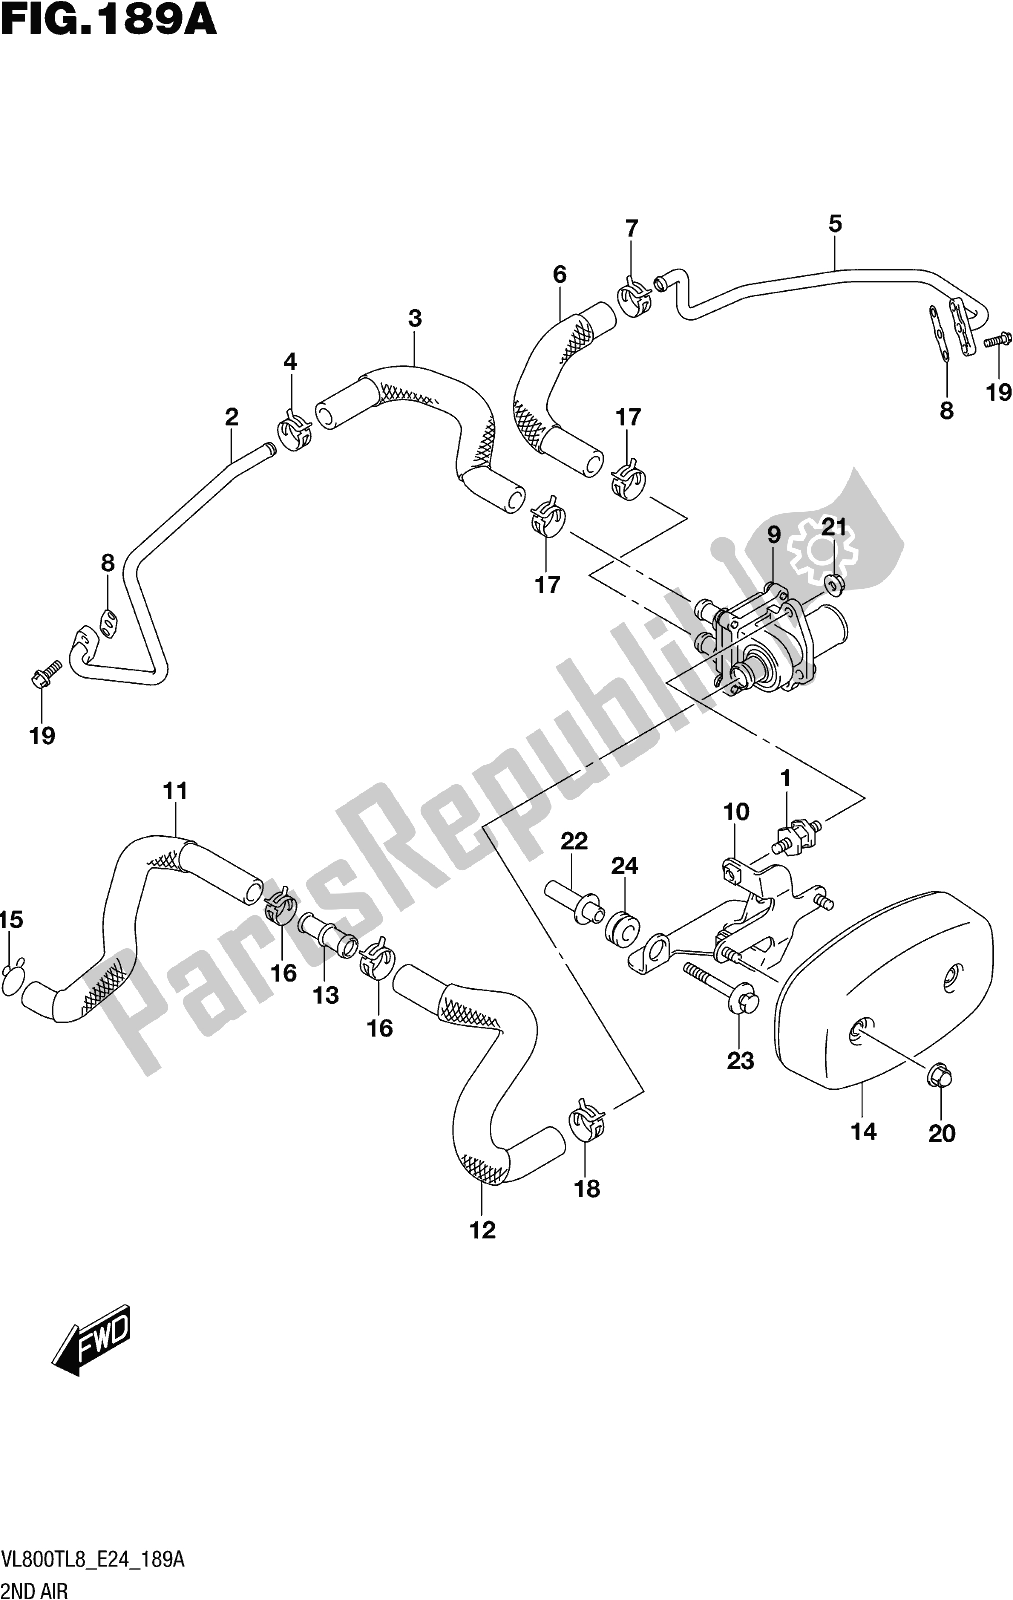 All parts for the Fig. 189a 2nd Air of the Suzuki VL 800T 2018